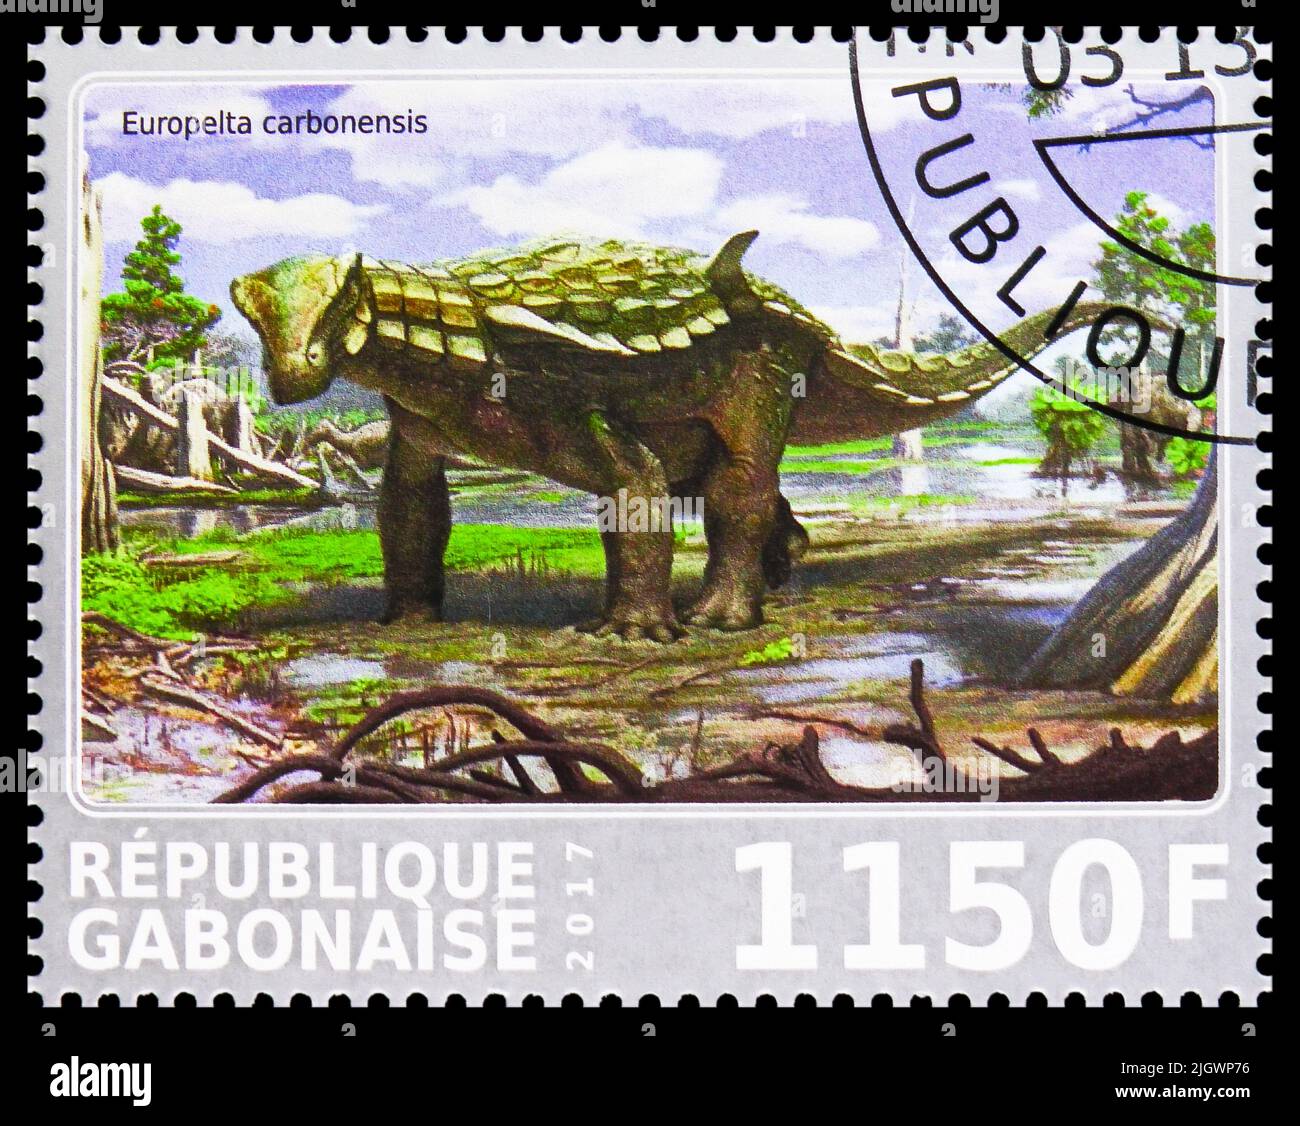 MOSCOW, RUSSIA - JUNE 17, 2022: Postage stamp printed in Gabon shows Europelta carbonensis, Dinosaurs serie, circa 2017 Stock Photo